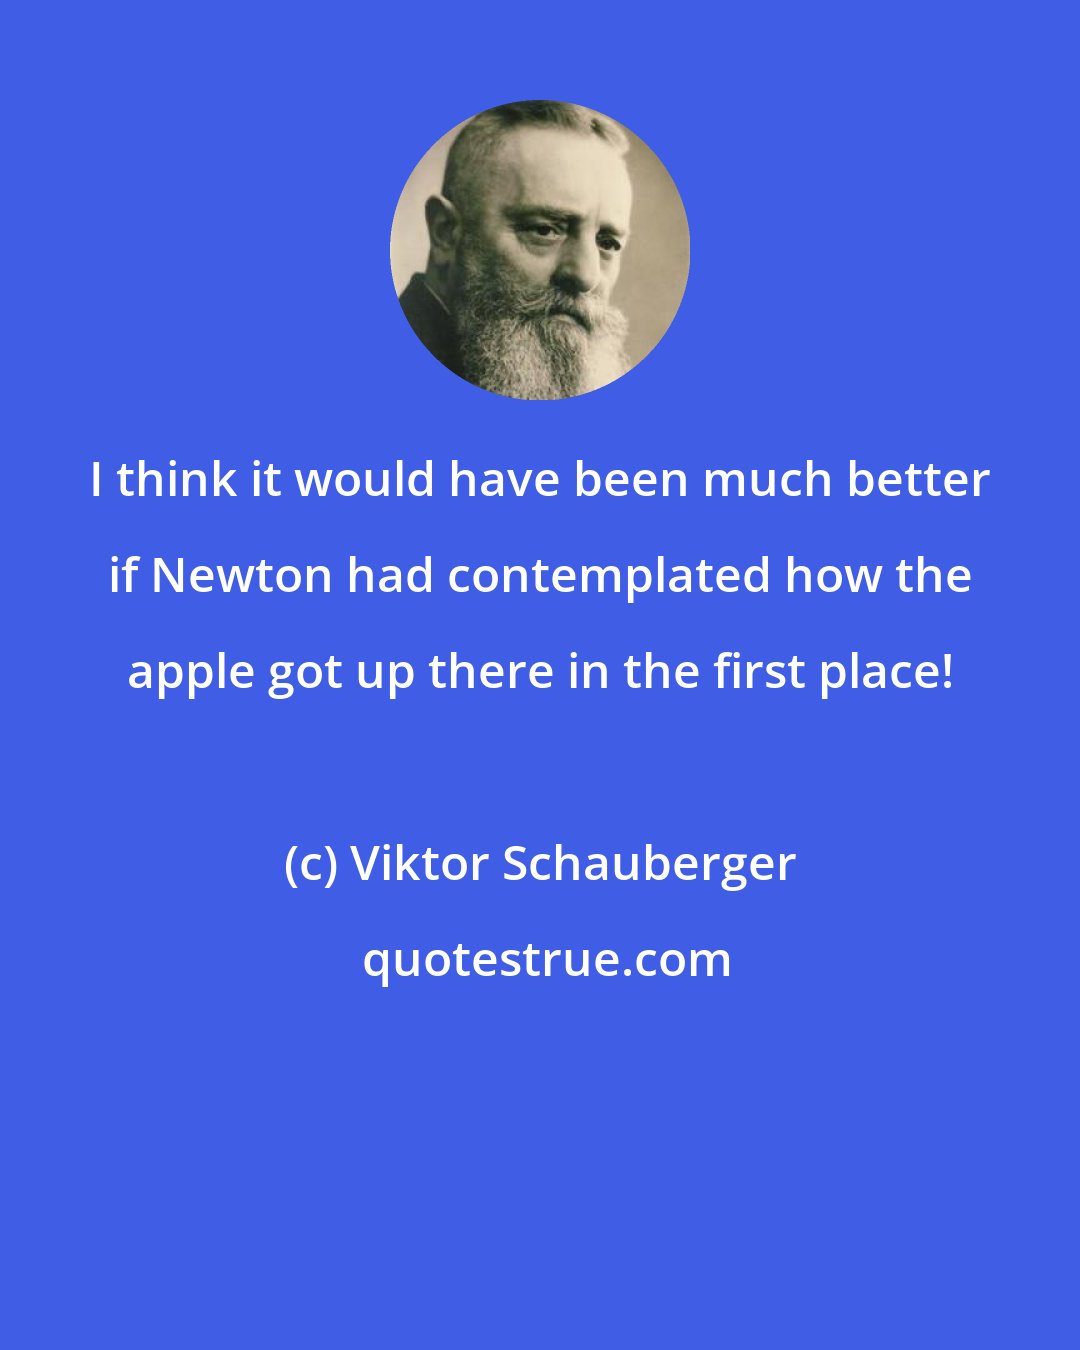 Viktor Schauberger: I think it would have been much better if Newton had contemplated how the apple got up there in the first place!